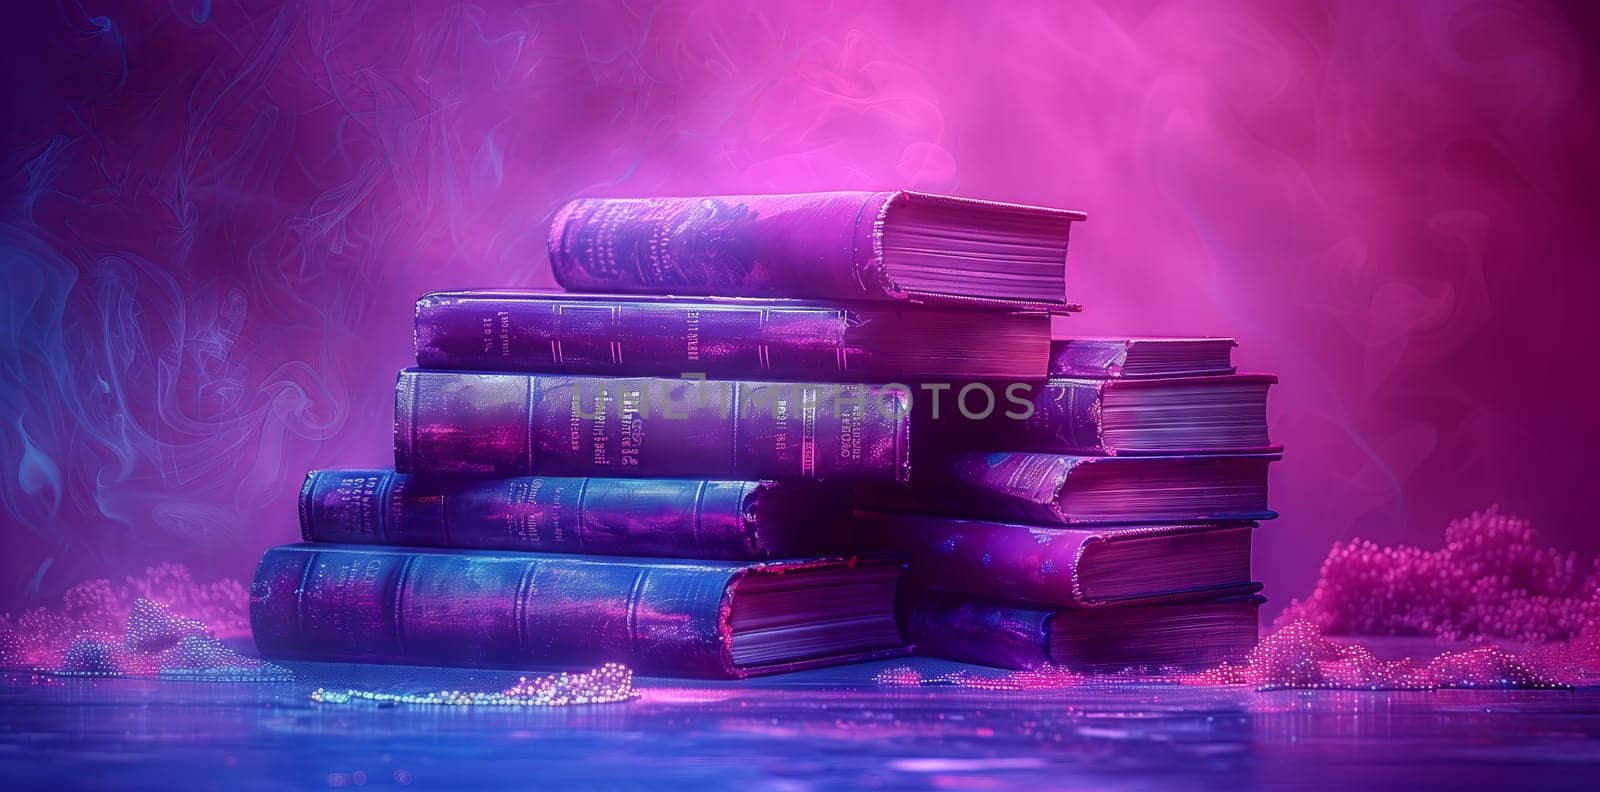 A stack of books in shades of violet and magenta sits on the table, creating a colorful art piece in the rooms landscape